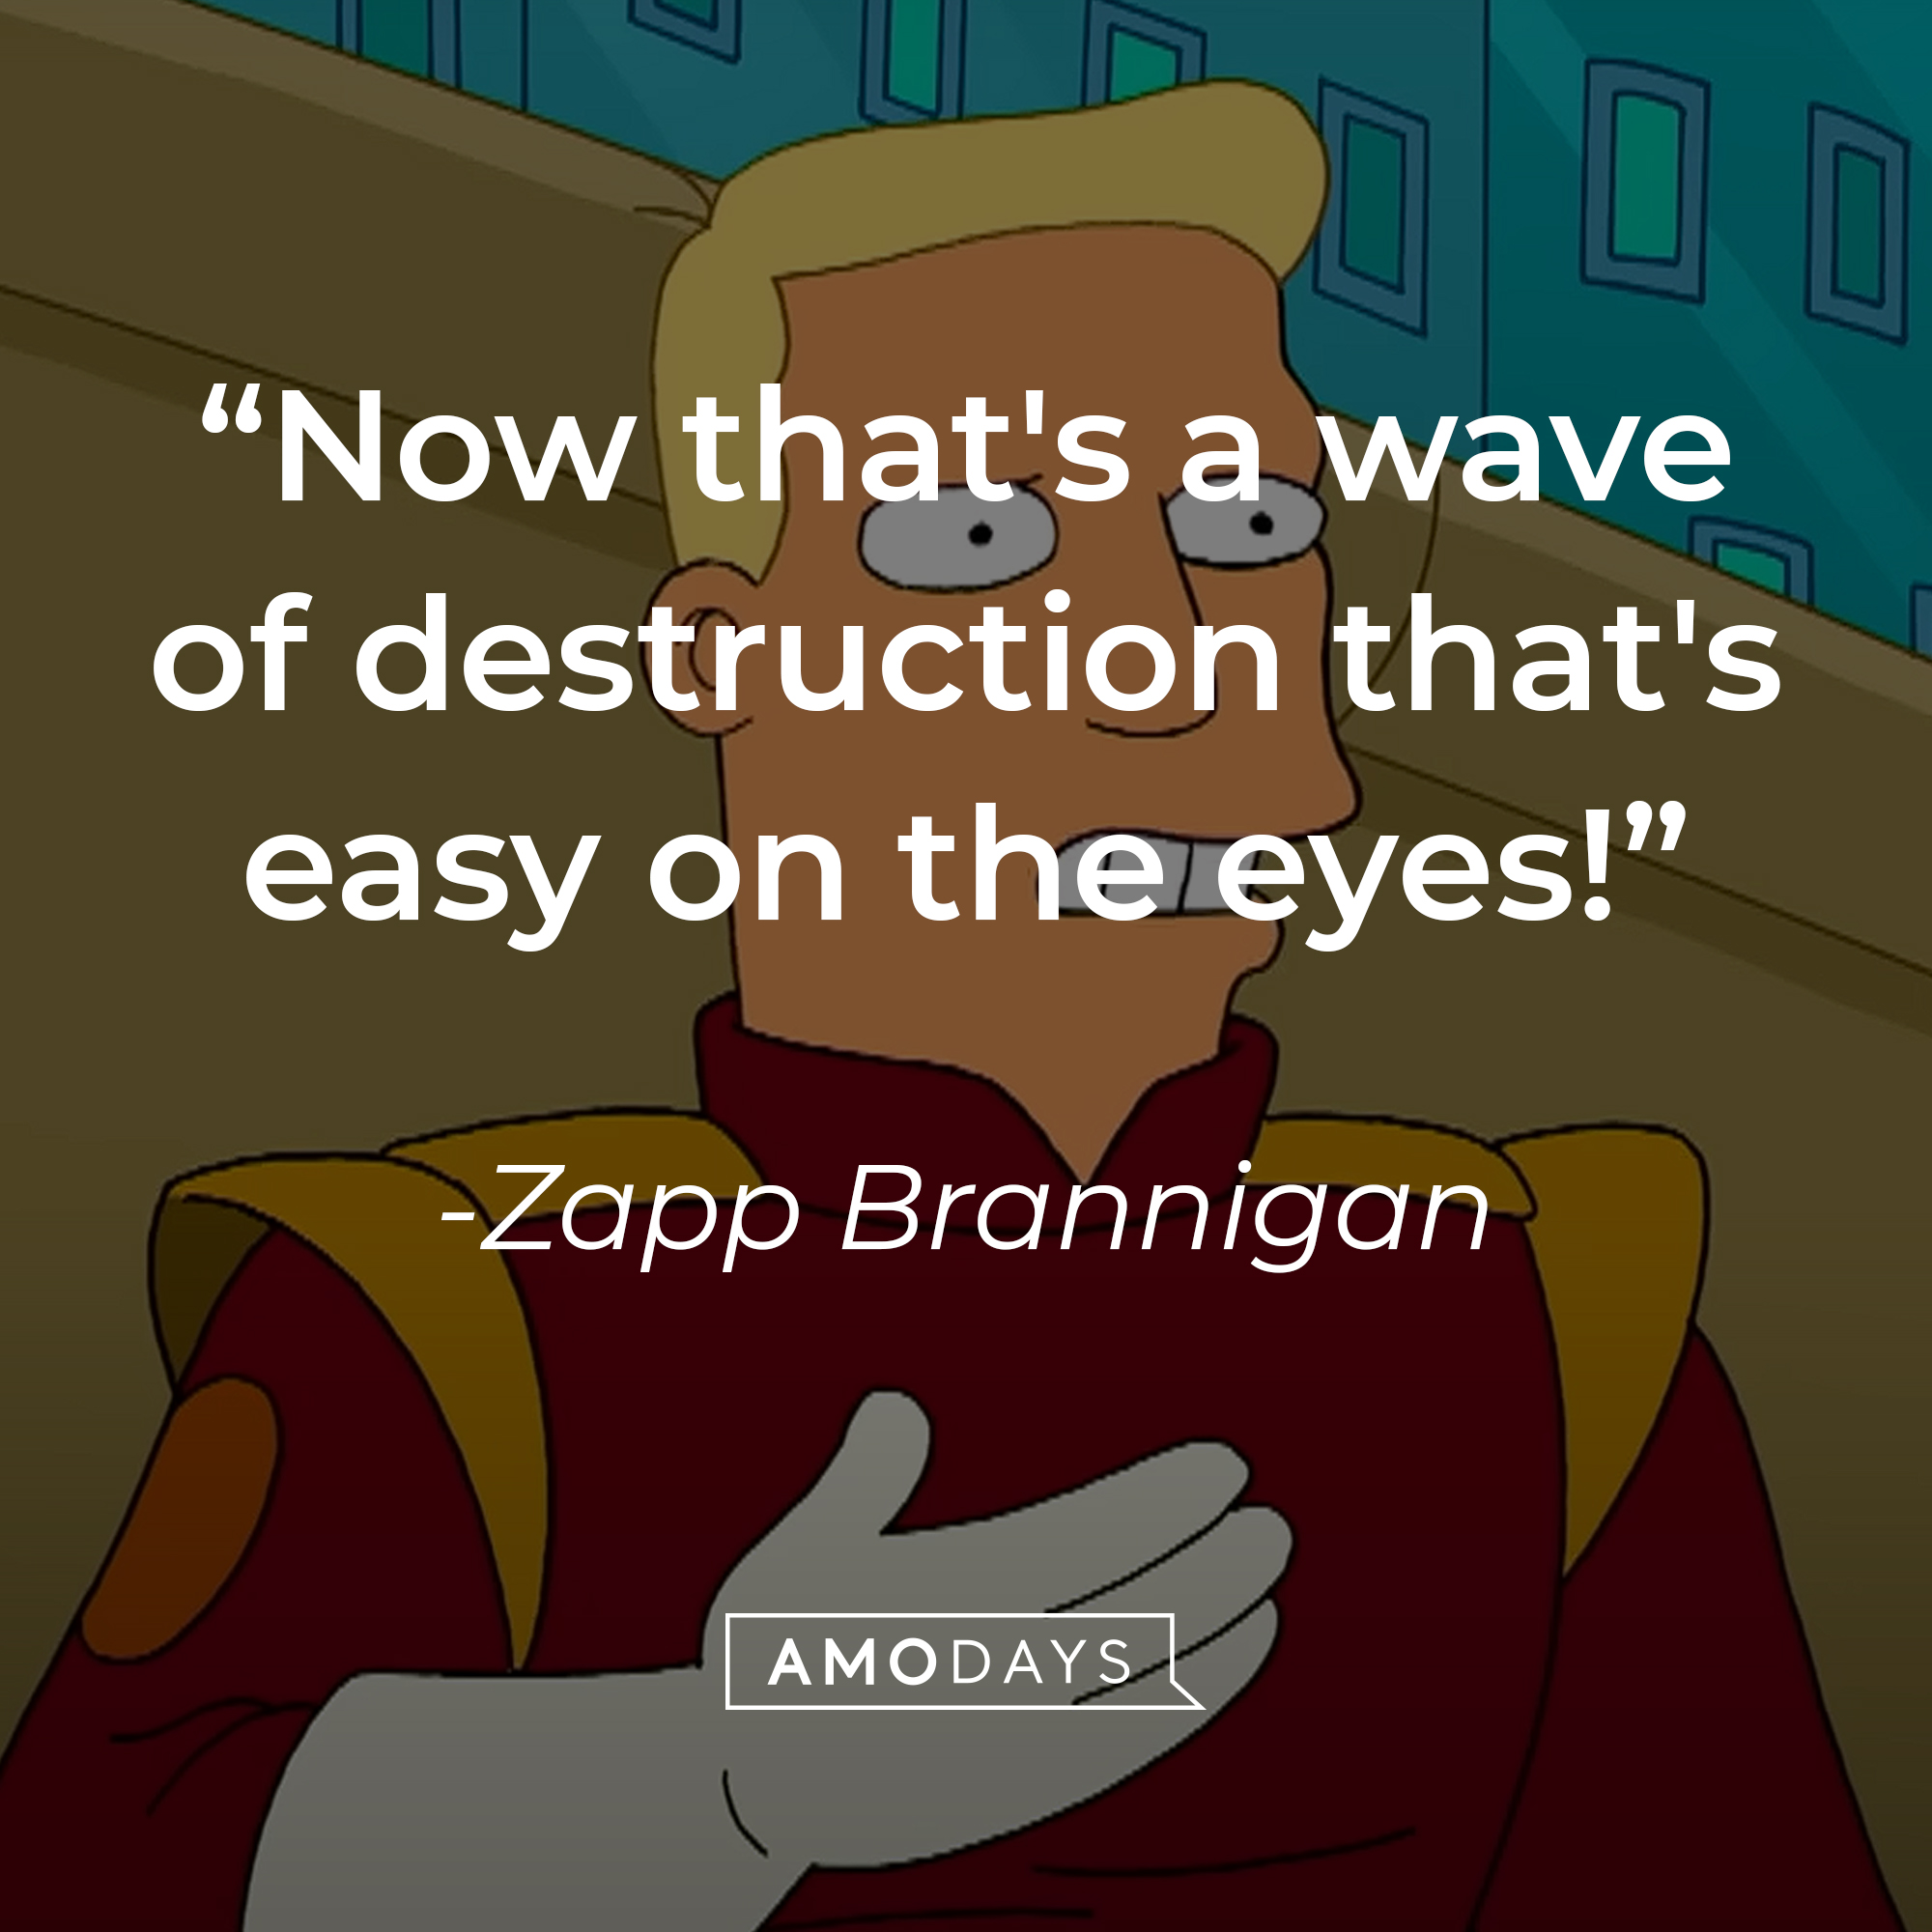 Zapp Brannigan's quote: "Now that's a wave of destruction that's easy on the eyes!" | Source: YouTube/adultswim